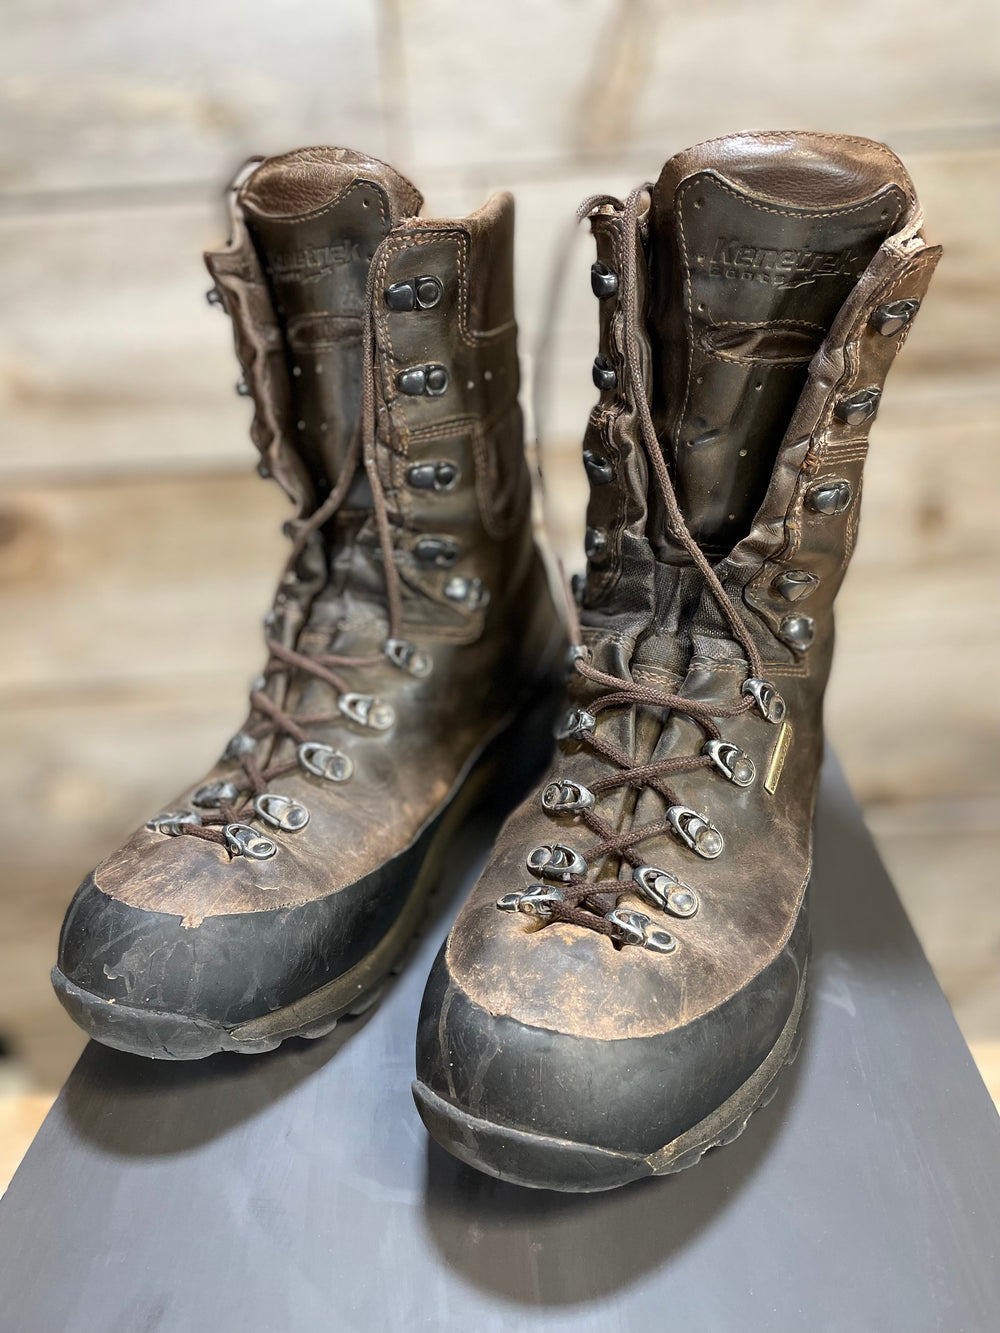 Why Are The Kenetrek Mountain Extreme Boots So Expensive? – Gear Fool